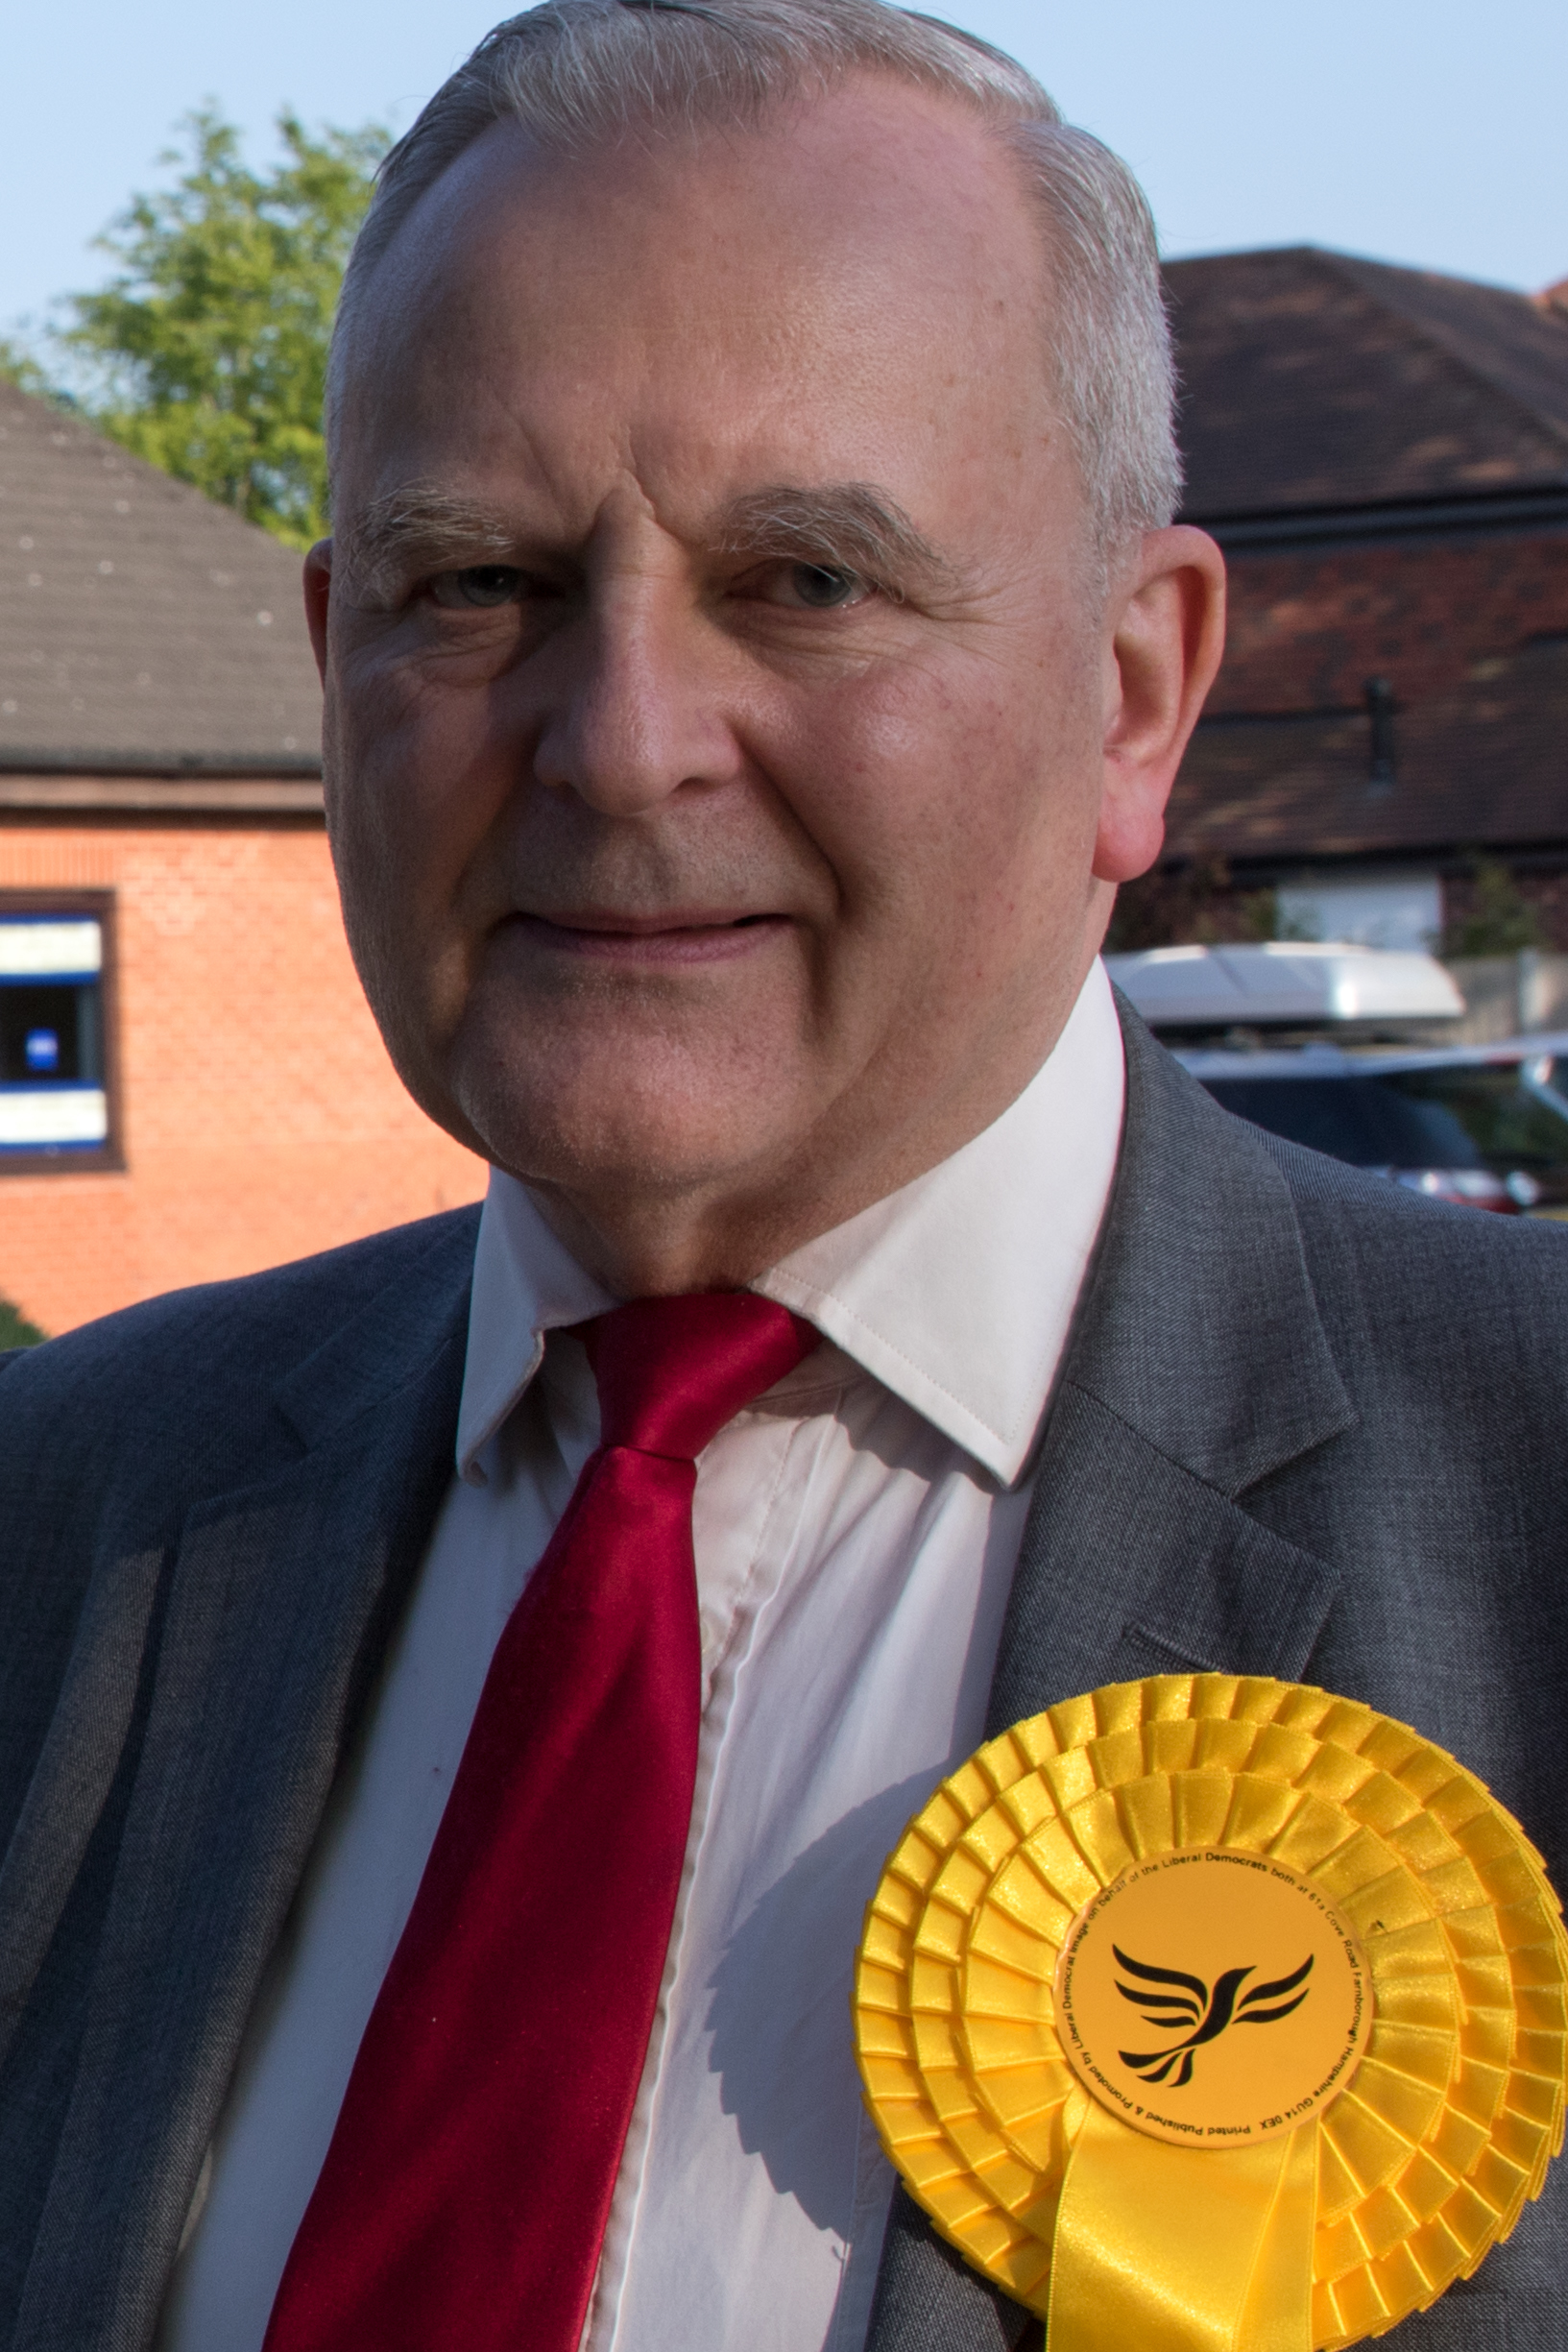 Cllr Peter Hirst is delighted to return to Middlewich Town Council where he served as a councillor for 16 years